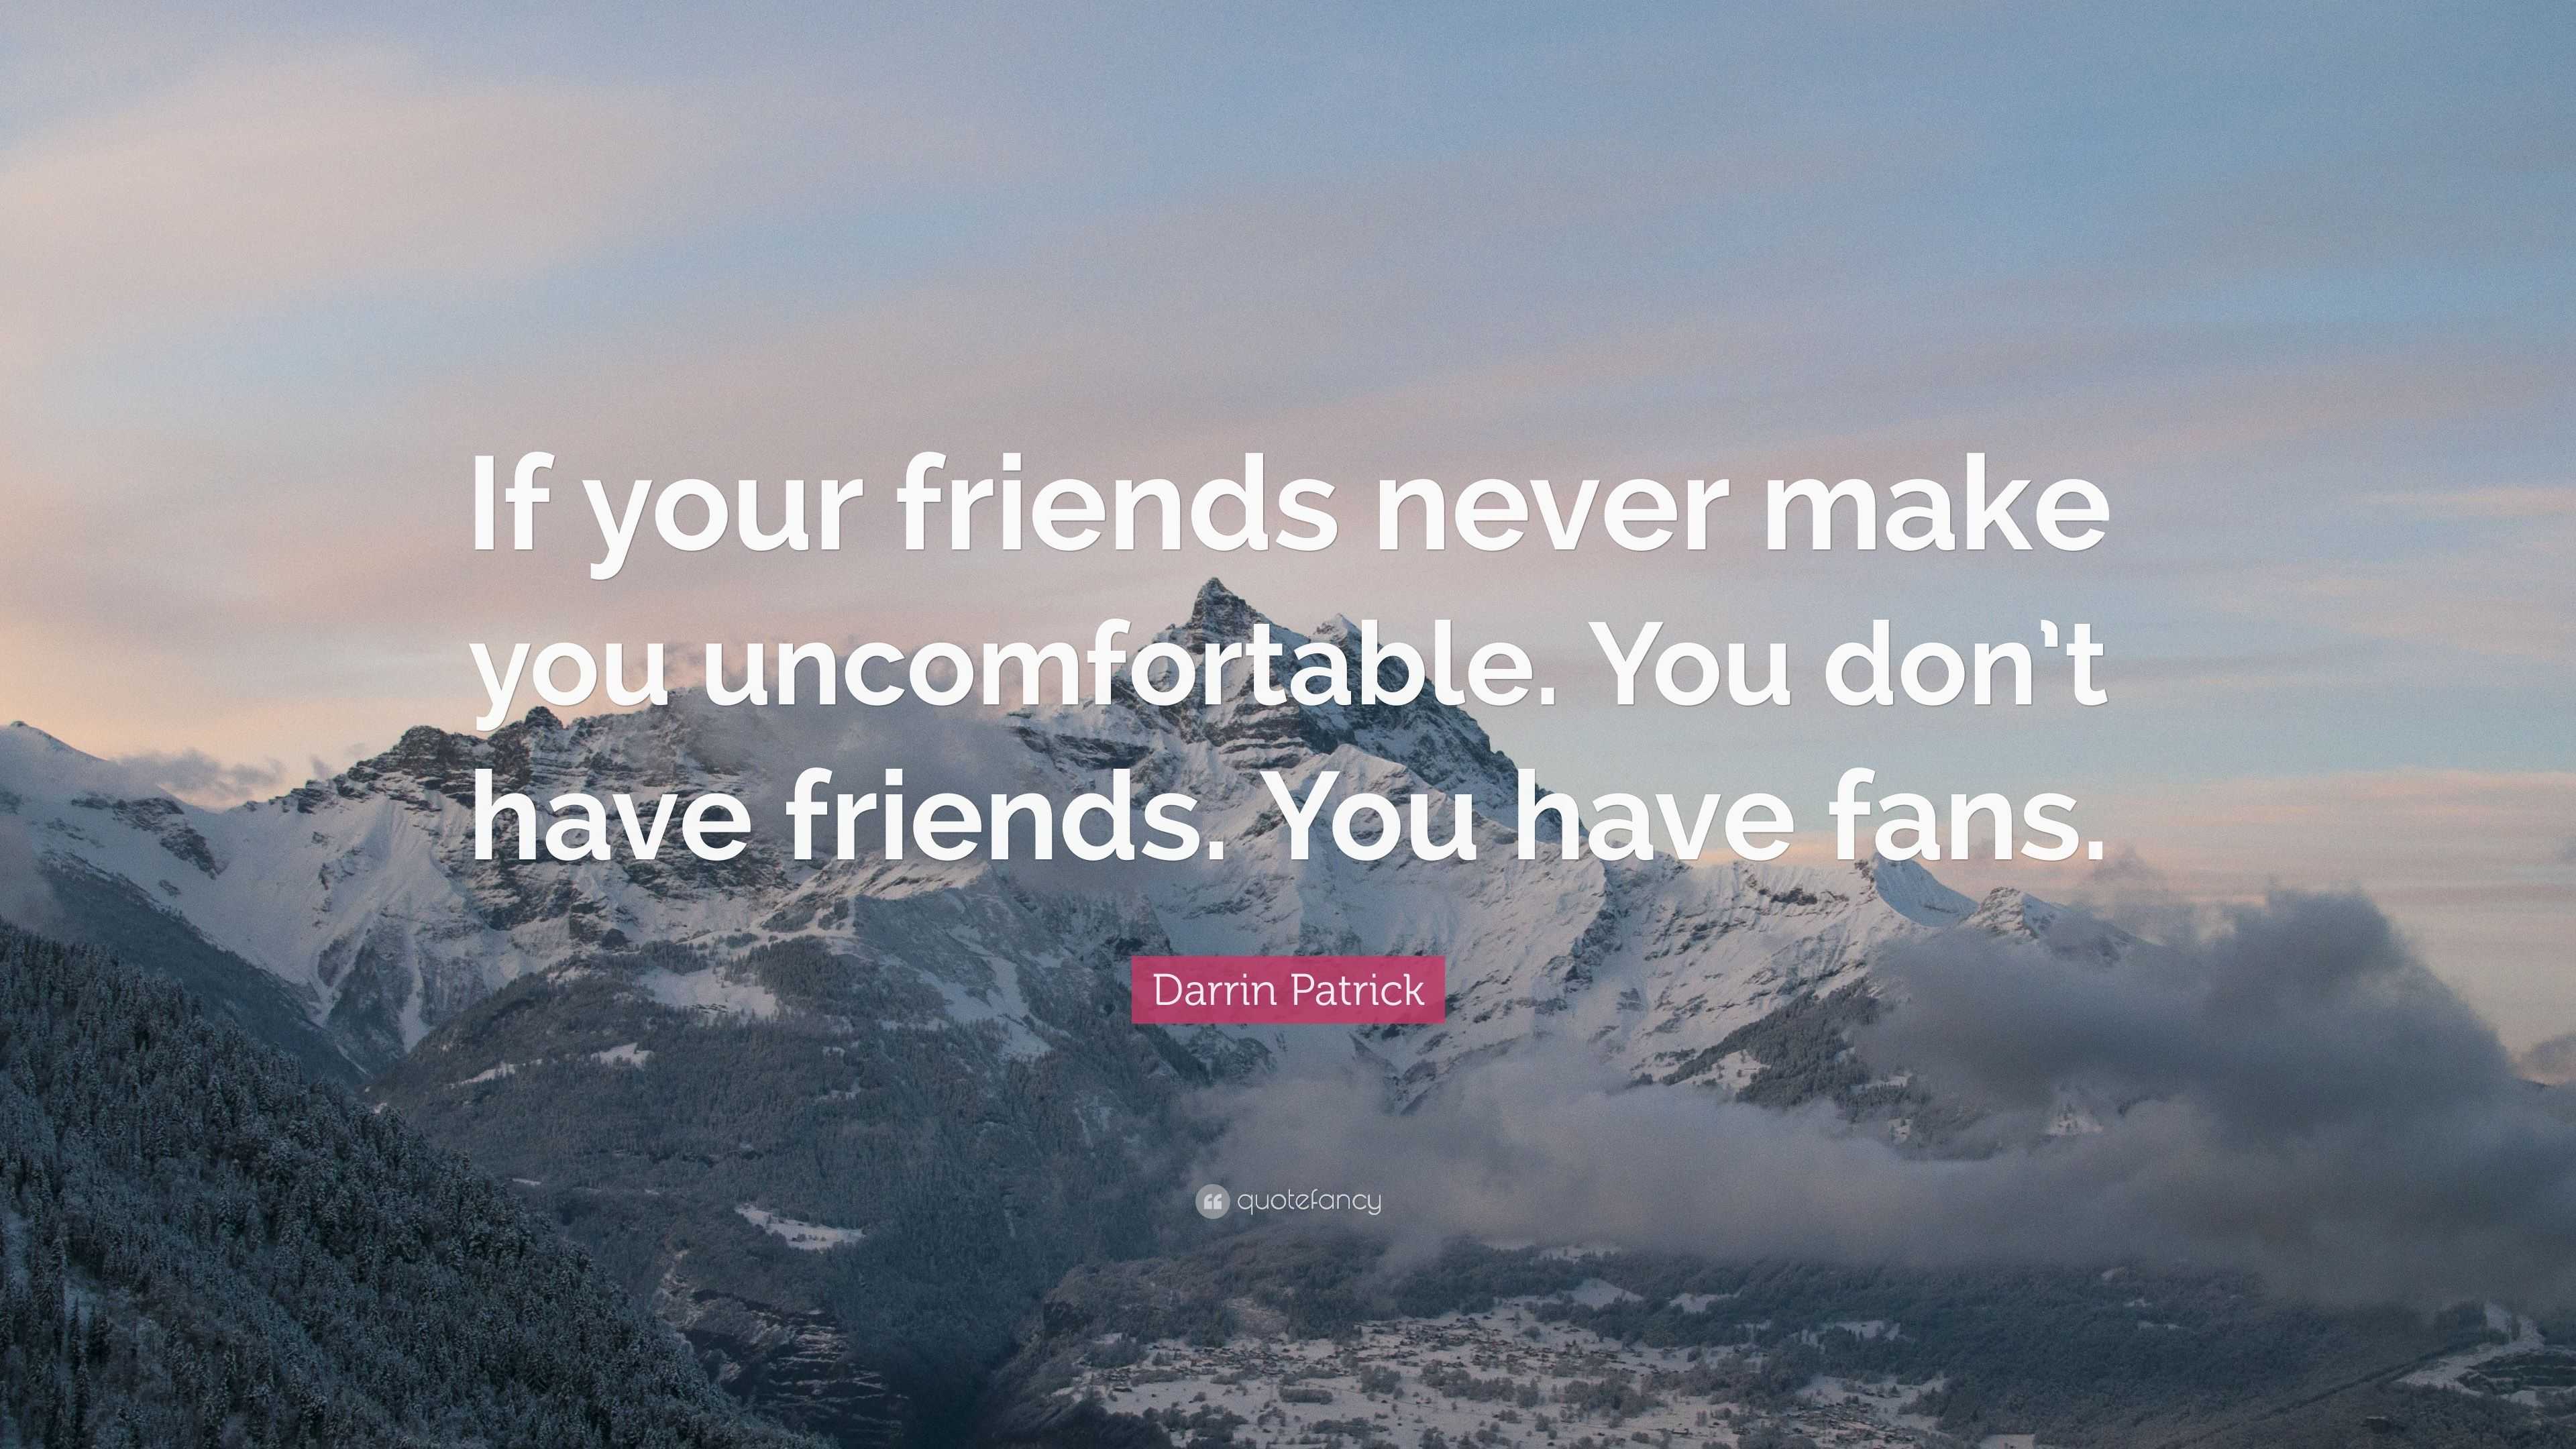 Darrin Patrick Quote: “If your friends never make you uncomfortable ...